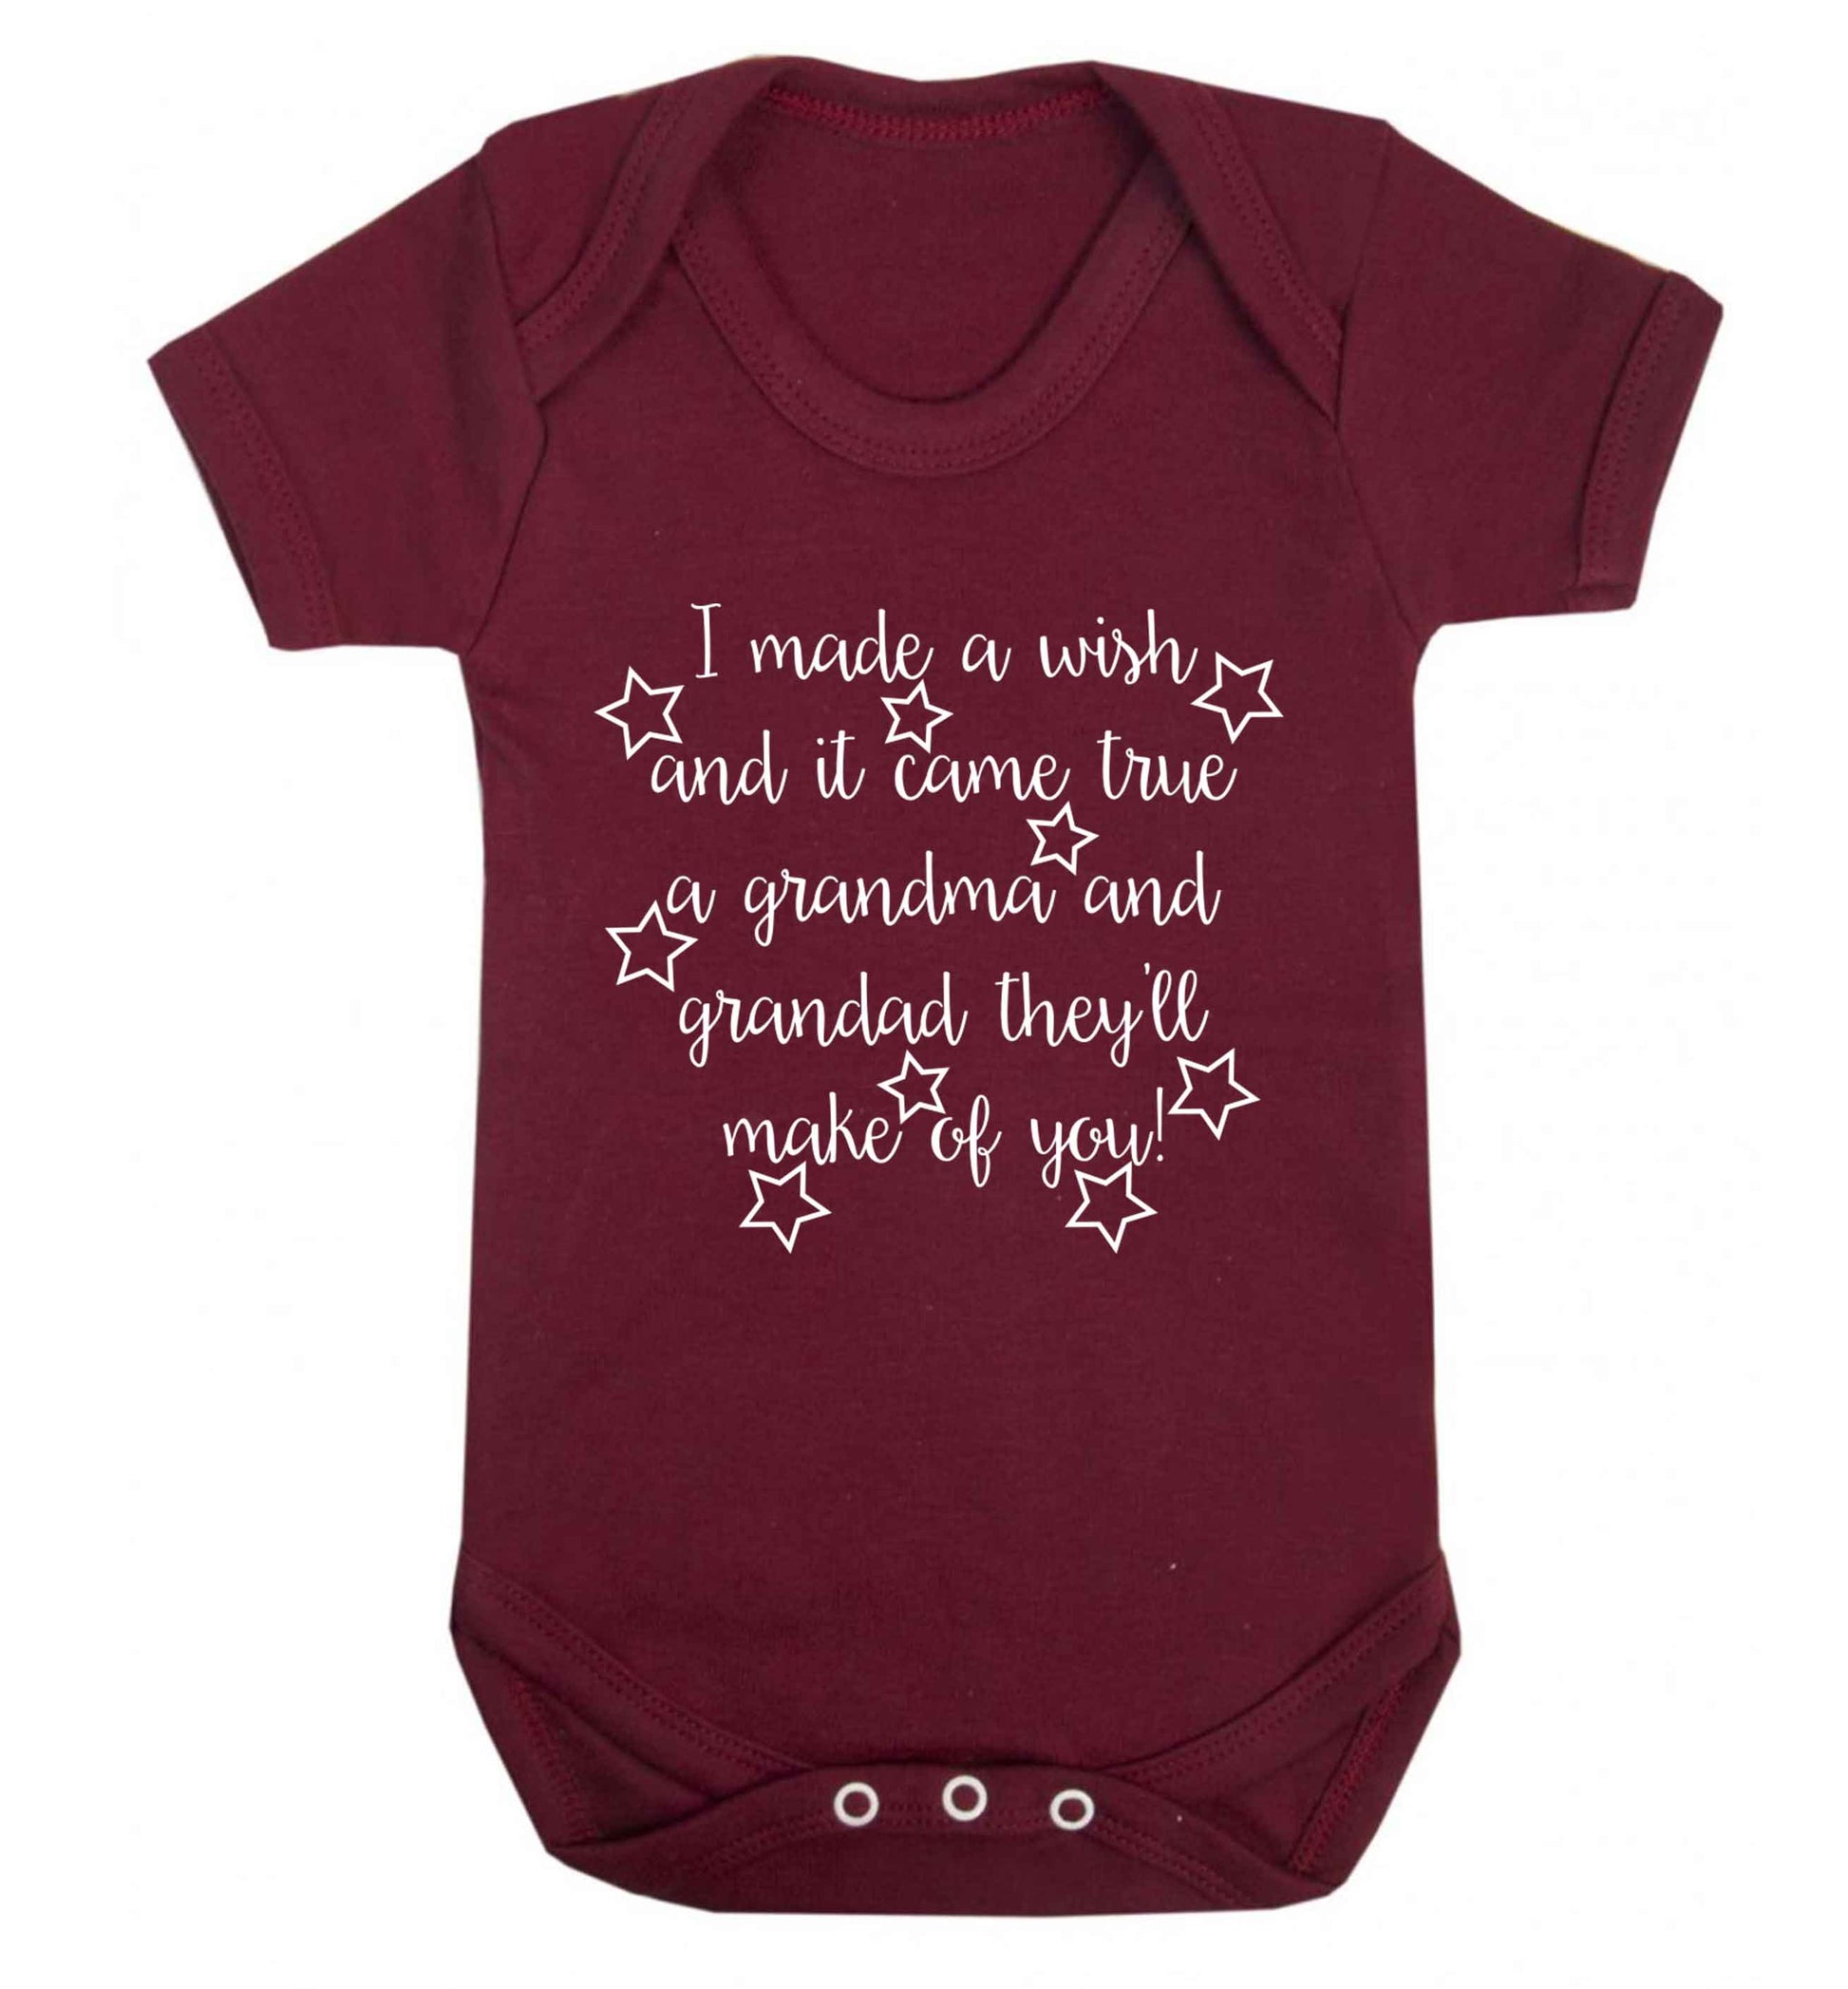 I made a wish and it came true a grandma and grandad they'll make of you! Baby Vest maroon 18-24 months